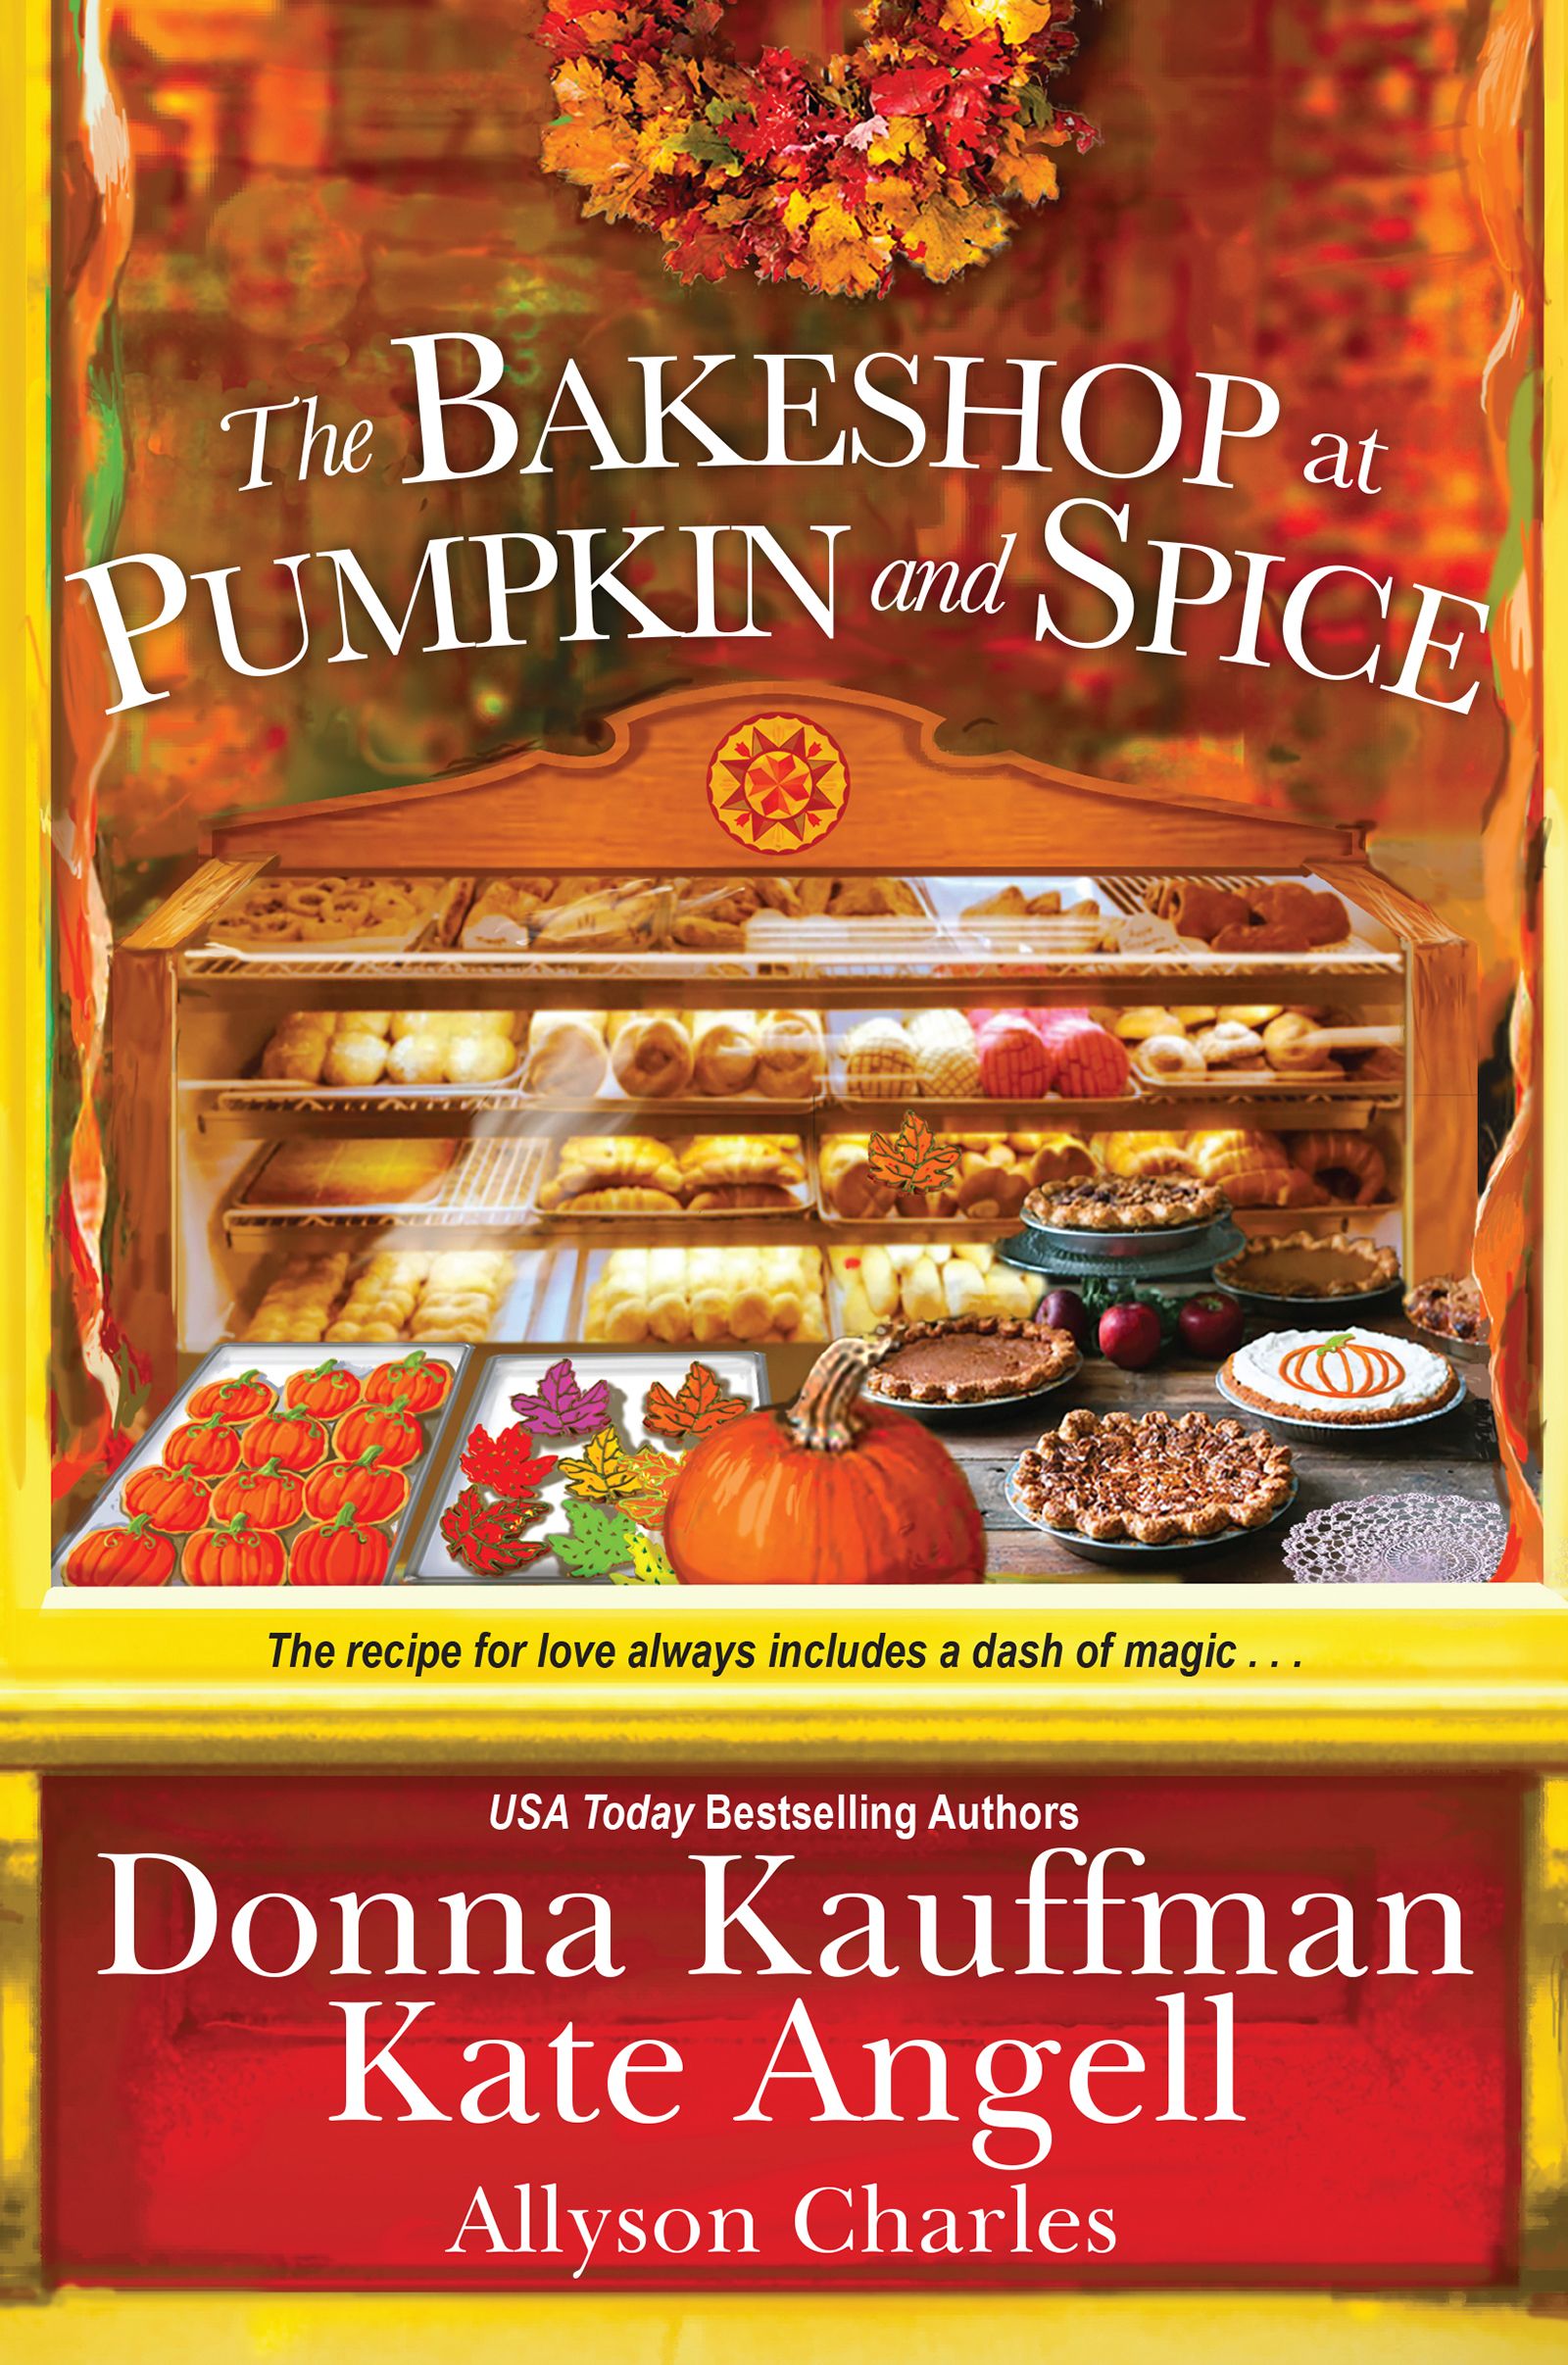 the bakeshop at pumpkin and spice book cover